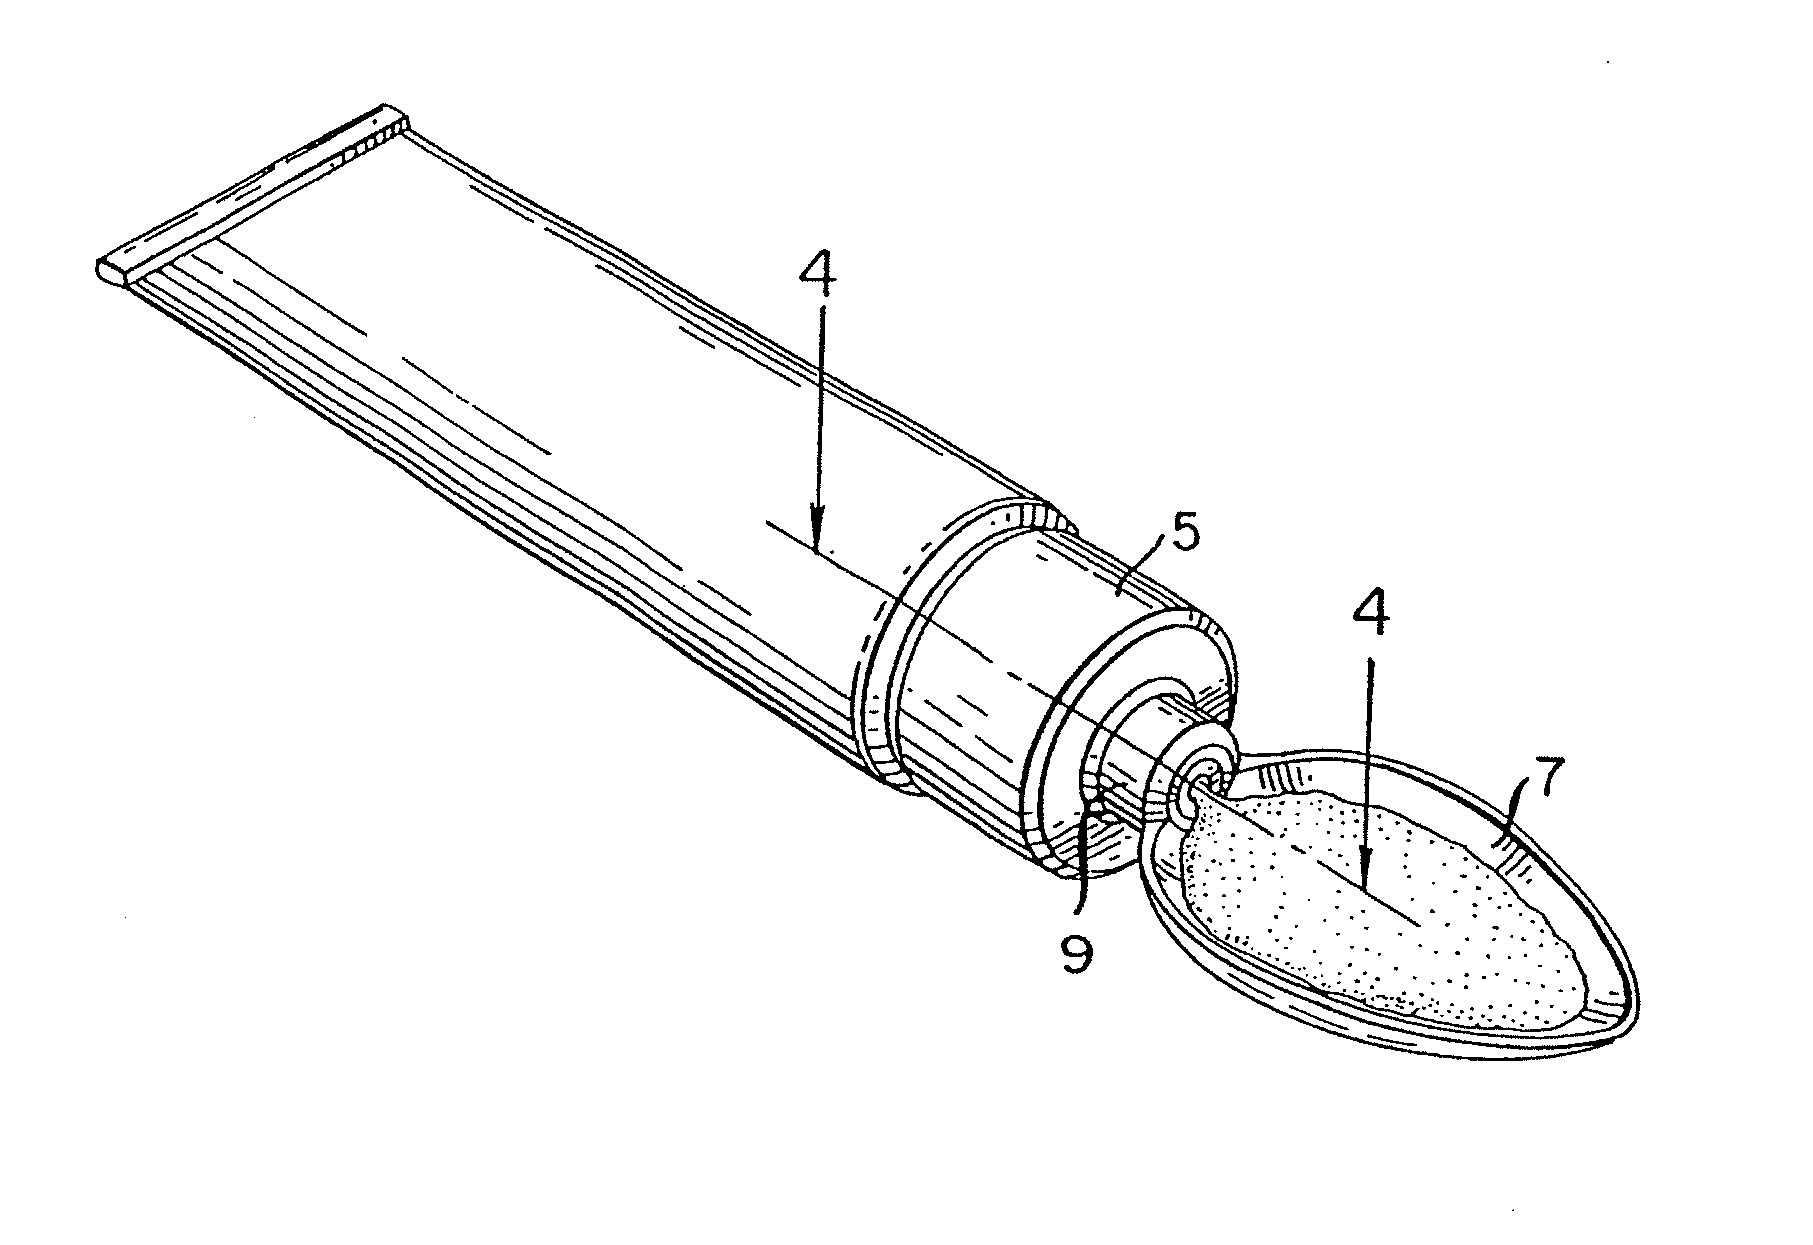 Method for administering a spill resistant pharmaceutical system